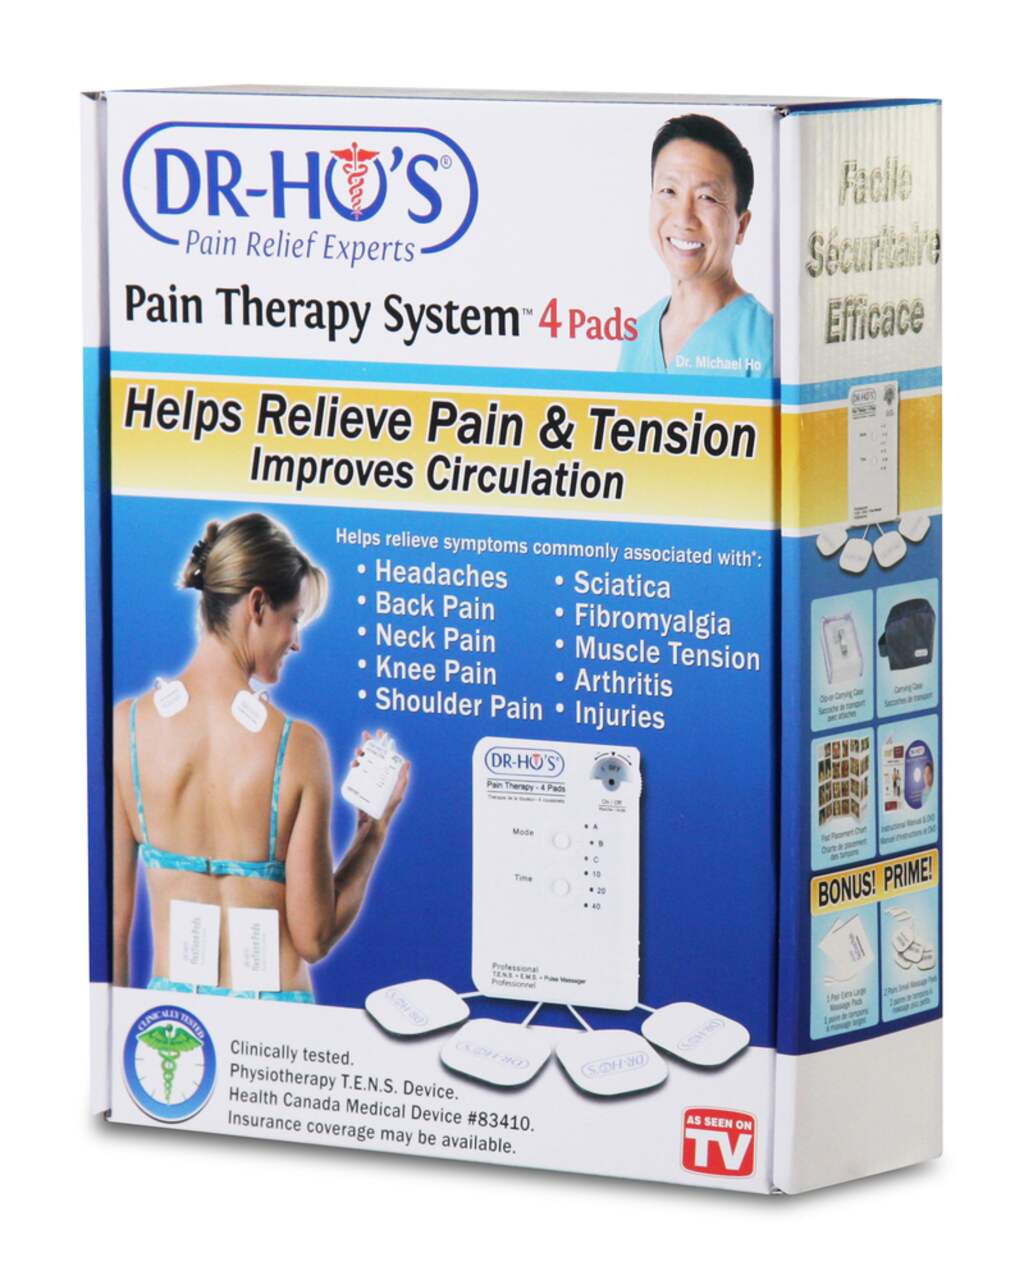 DR-HO'S - Neck Pain Pro with Gel Pad Kit and Pain Therapy Back Relief Belt